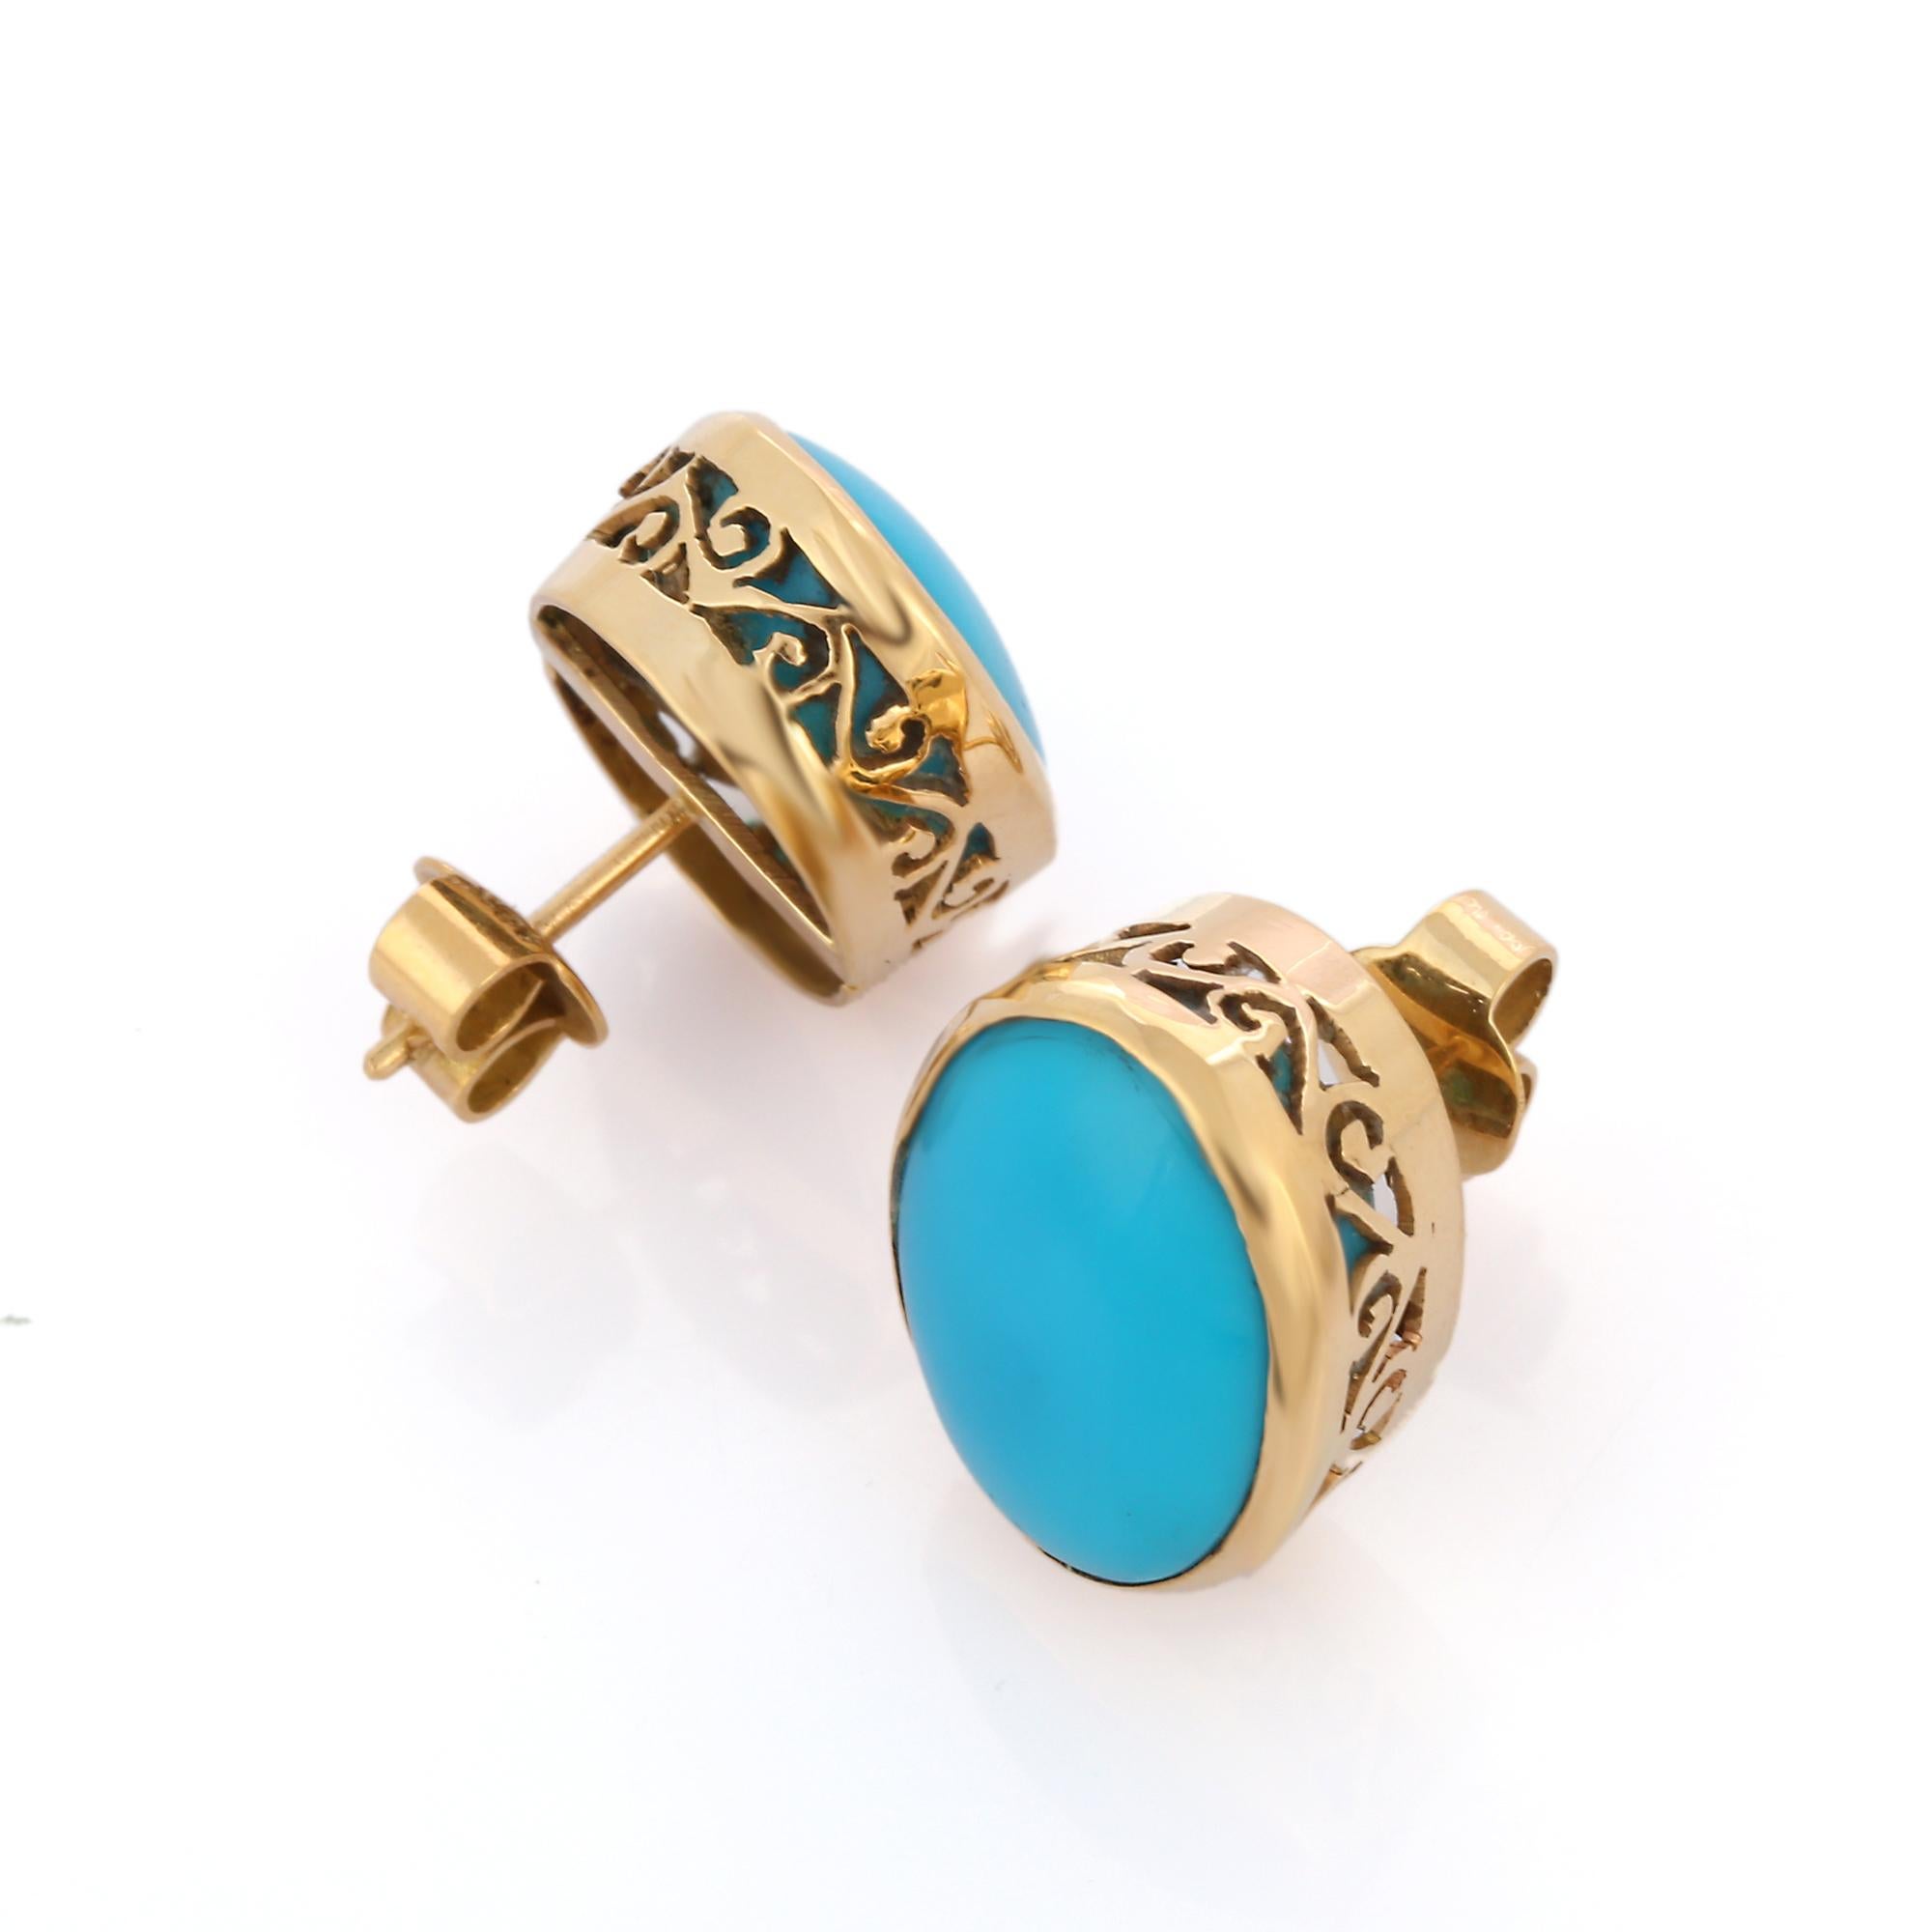 Studs create a subtle beauty while showcasing the colors of the natural precious gemstones. 

Oval cut cabochon turquoise studs in 18K gold. Embrace your look with these stunning pair of earrings suitable for any occasion to complete your